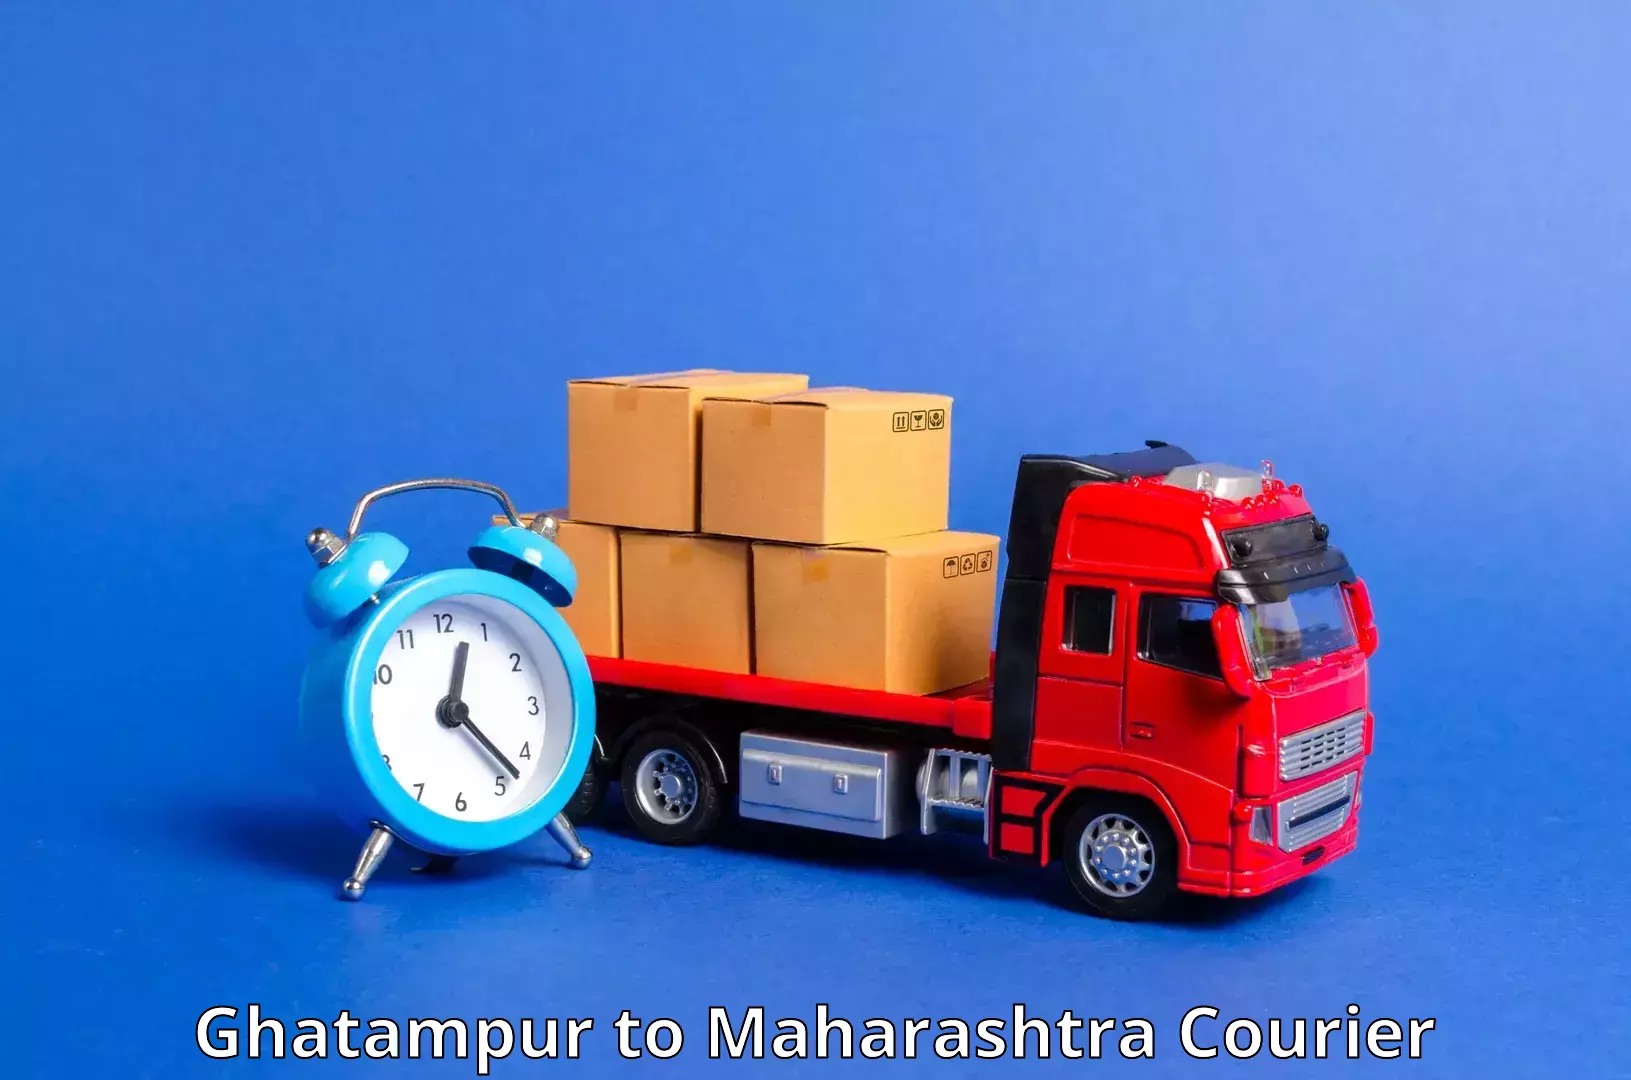 Budget-friendly shipping Ghatampur to Solapur